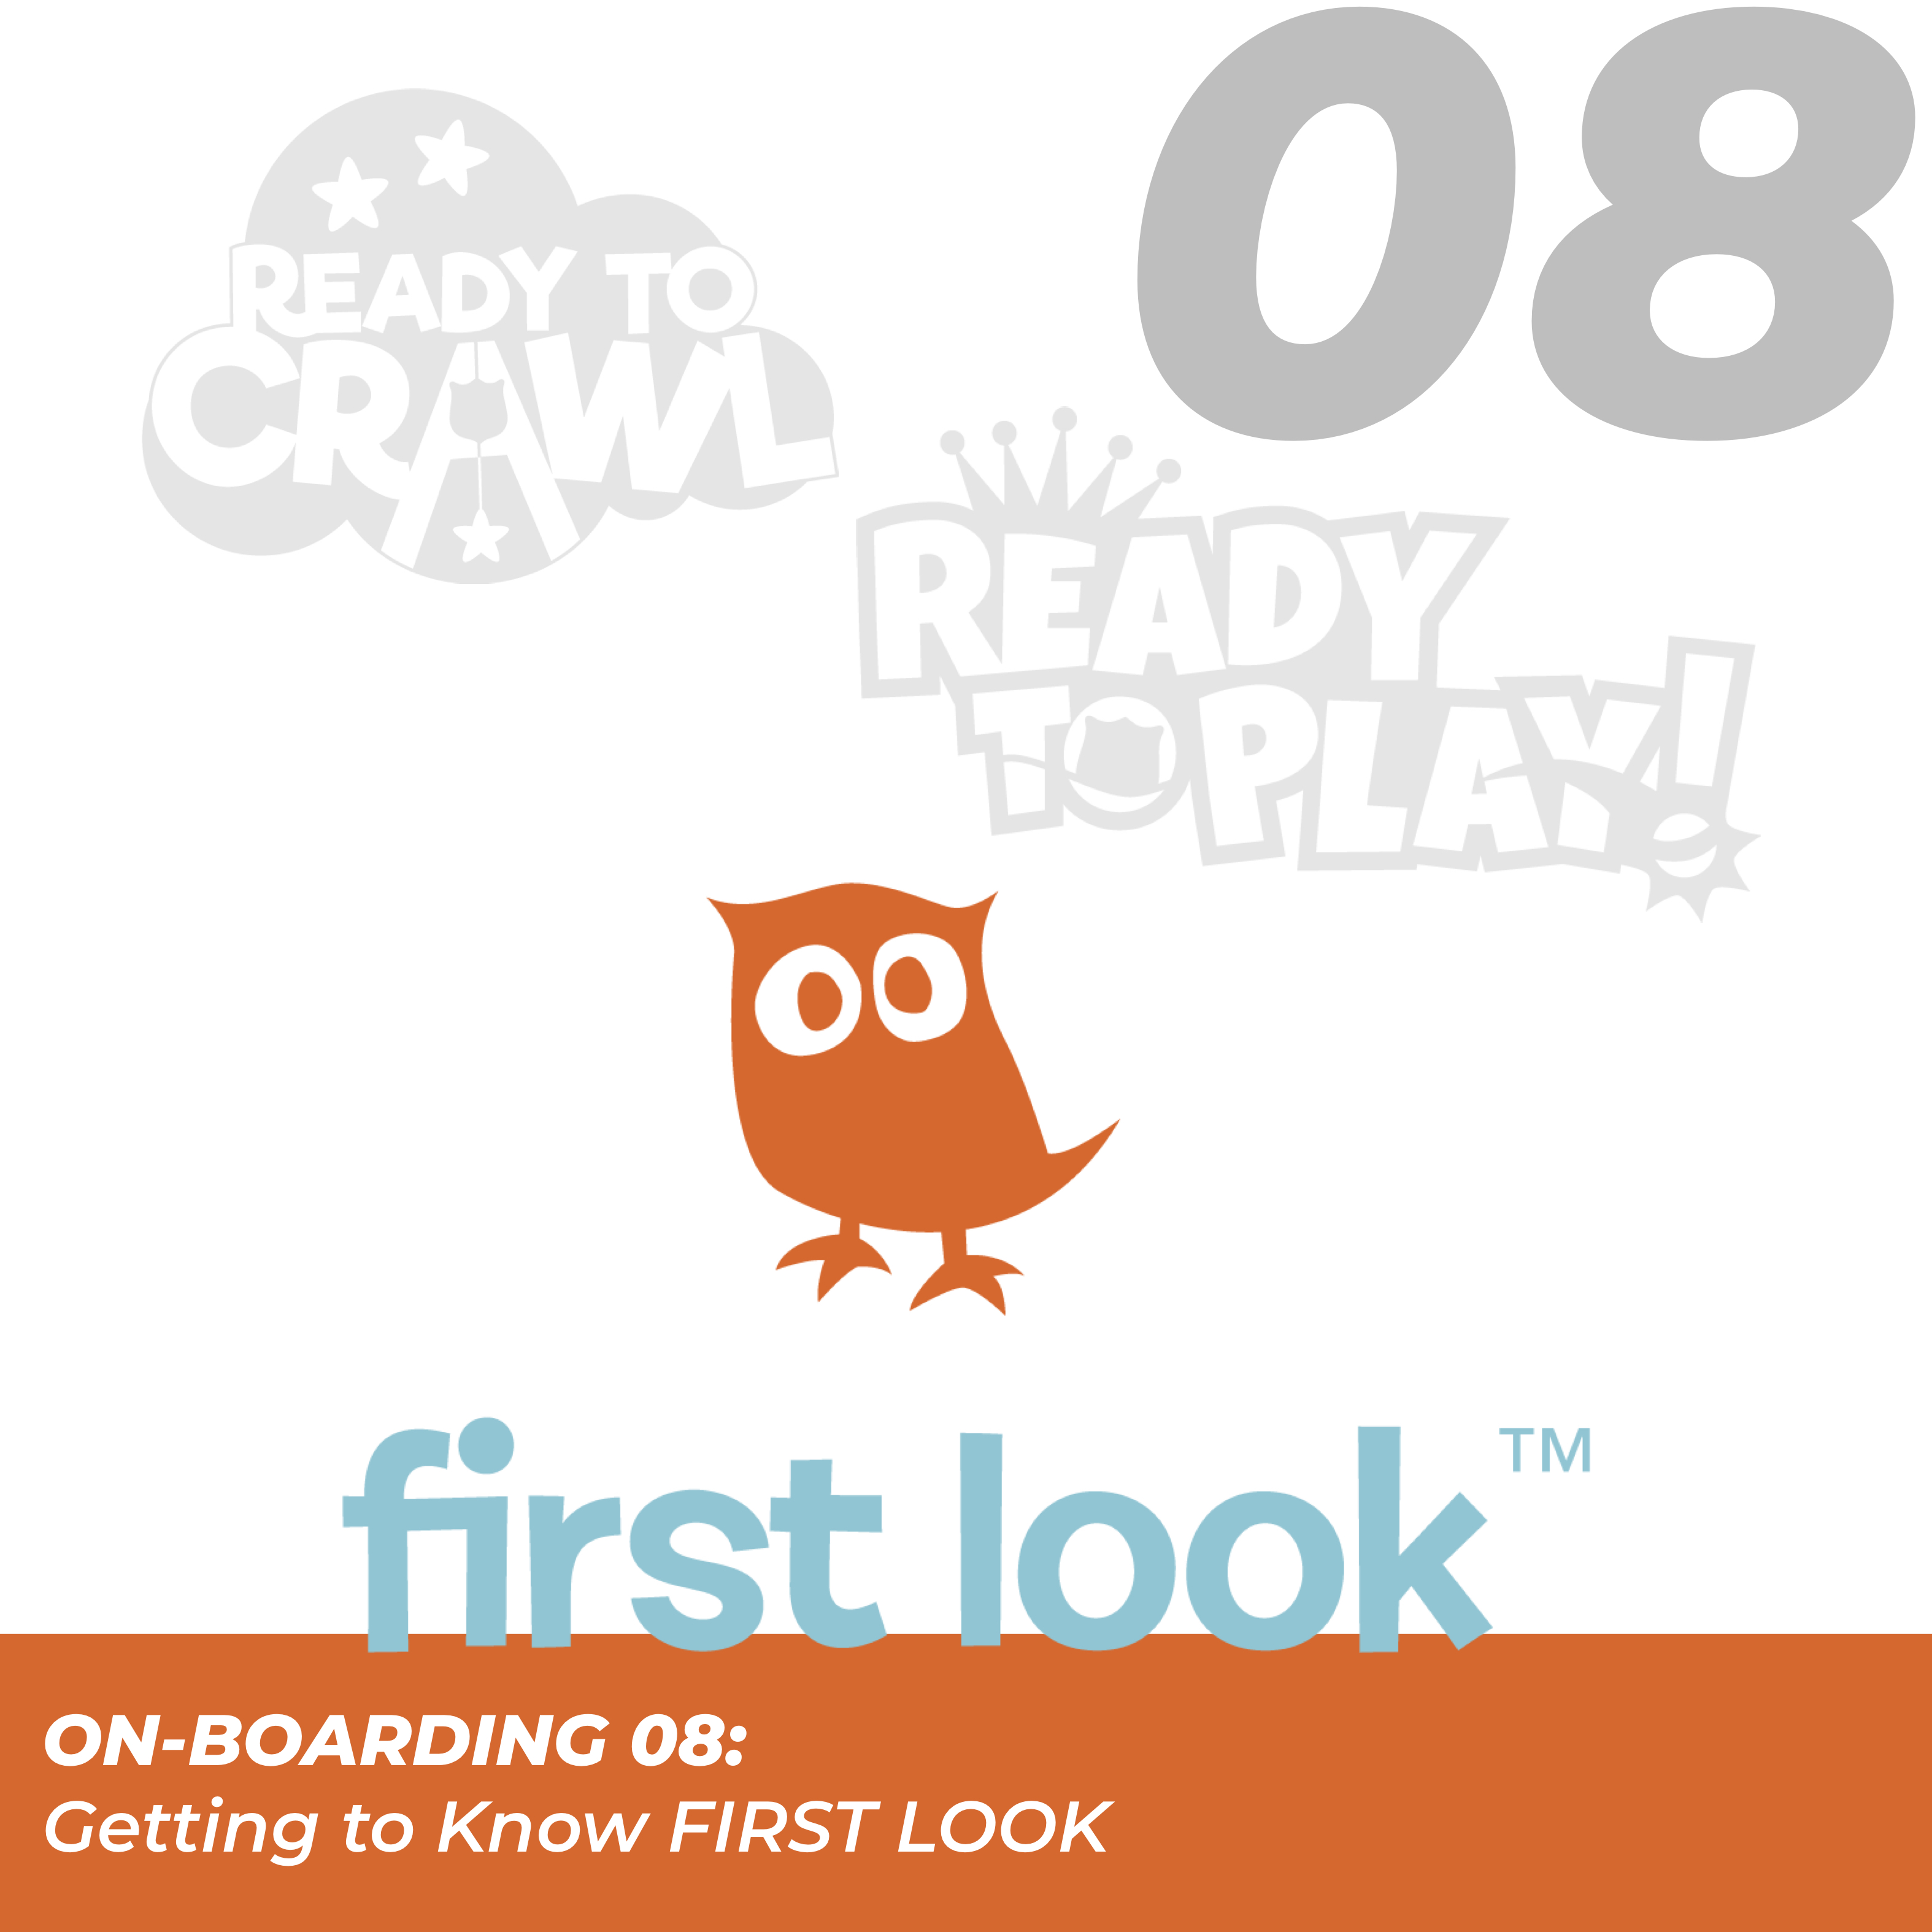 Click here for On-boarding 08: Getting to know First Look.